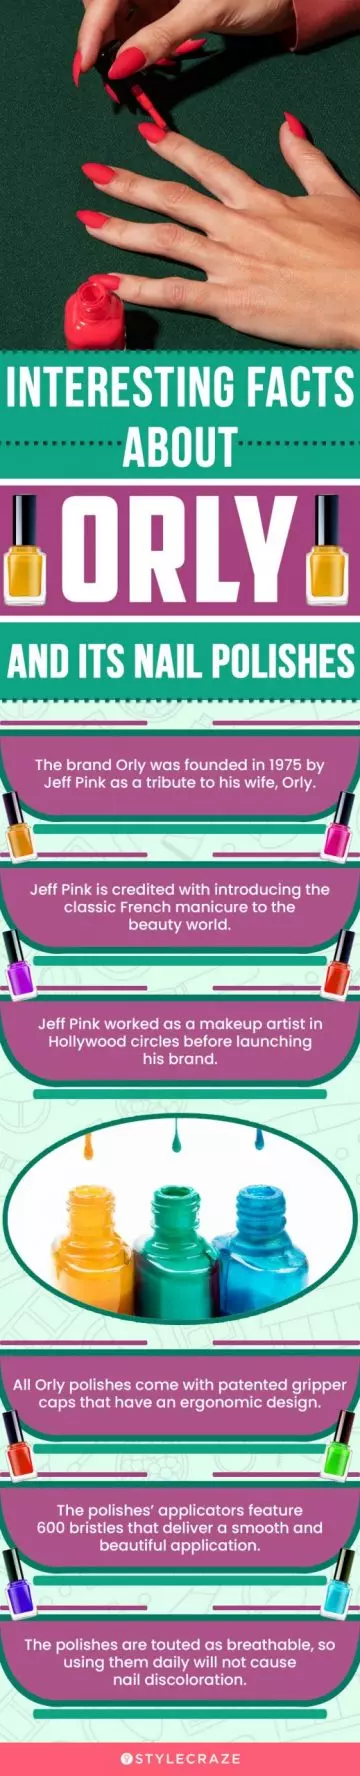 Interesting Facts About The Brand, Orly And Its Polishes (infographic)